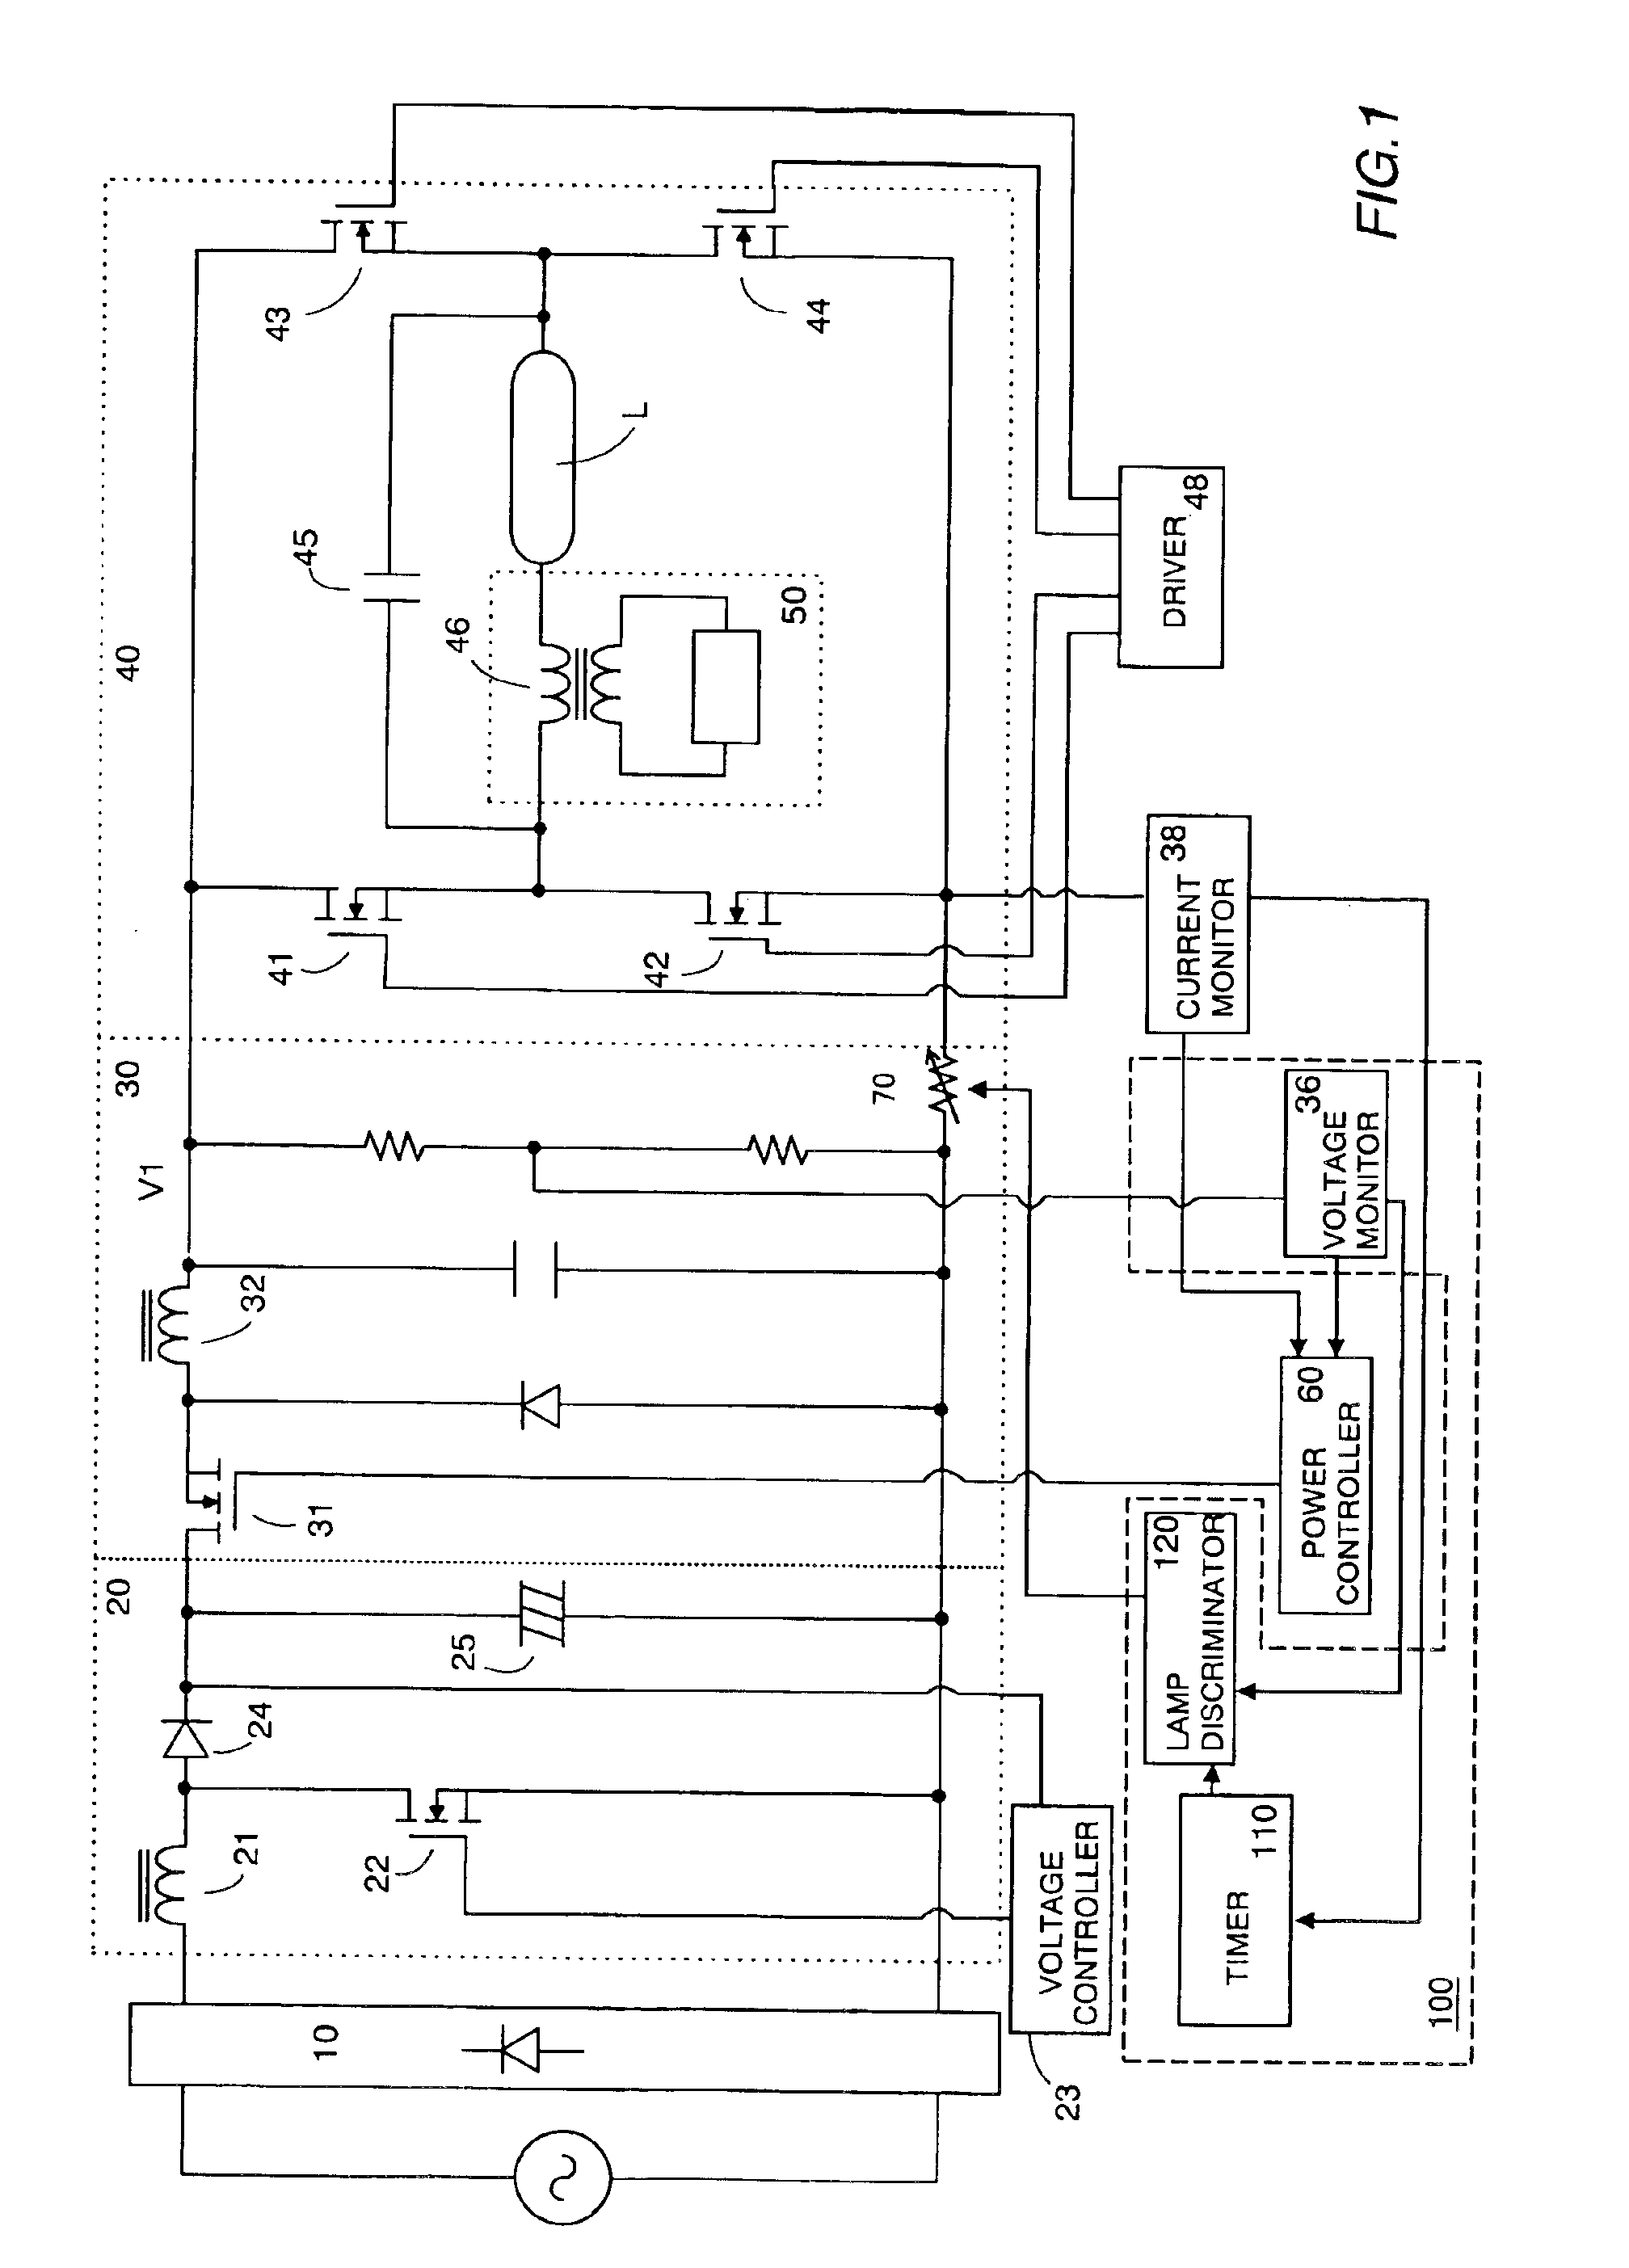 Electronic ballast for a high-pressure discharge lamp